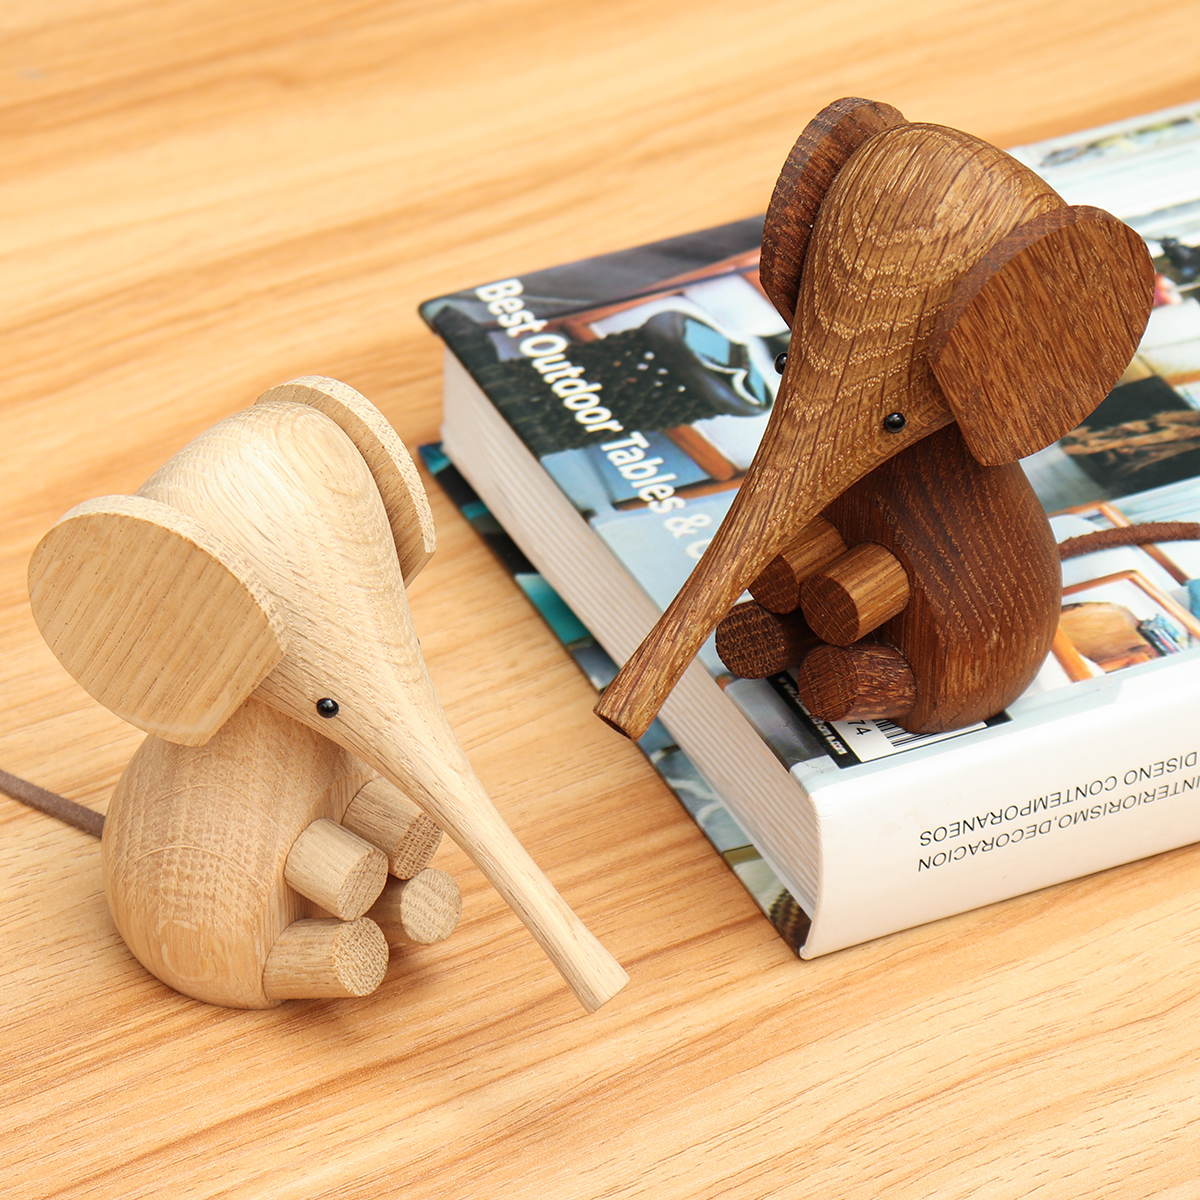 Adjustable-Handicraft-Elephant-Wooden-Animal-Doll-Smooth-Surface-Home-Decorations-Gift-1640775-2